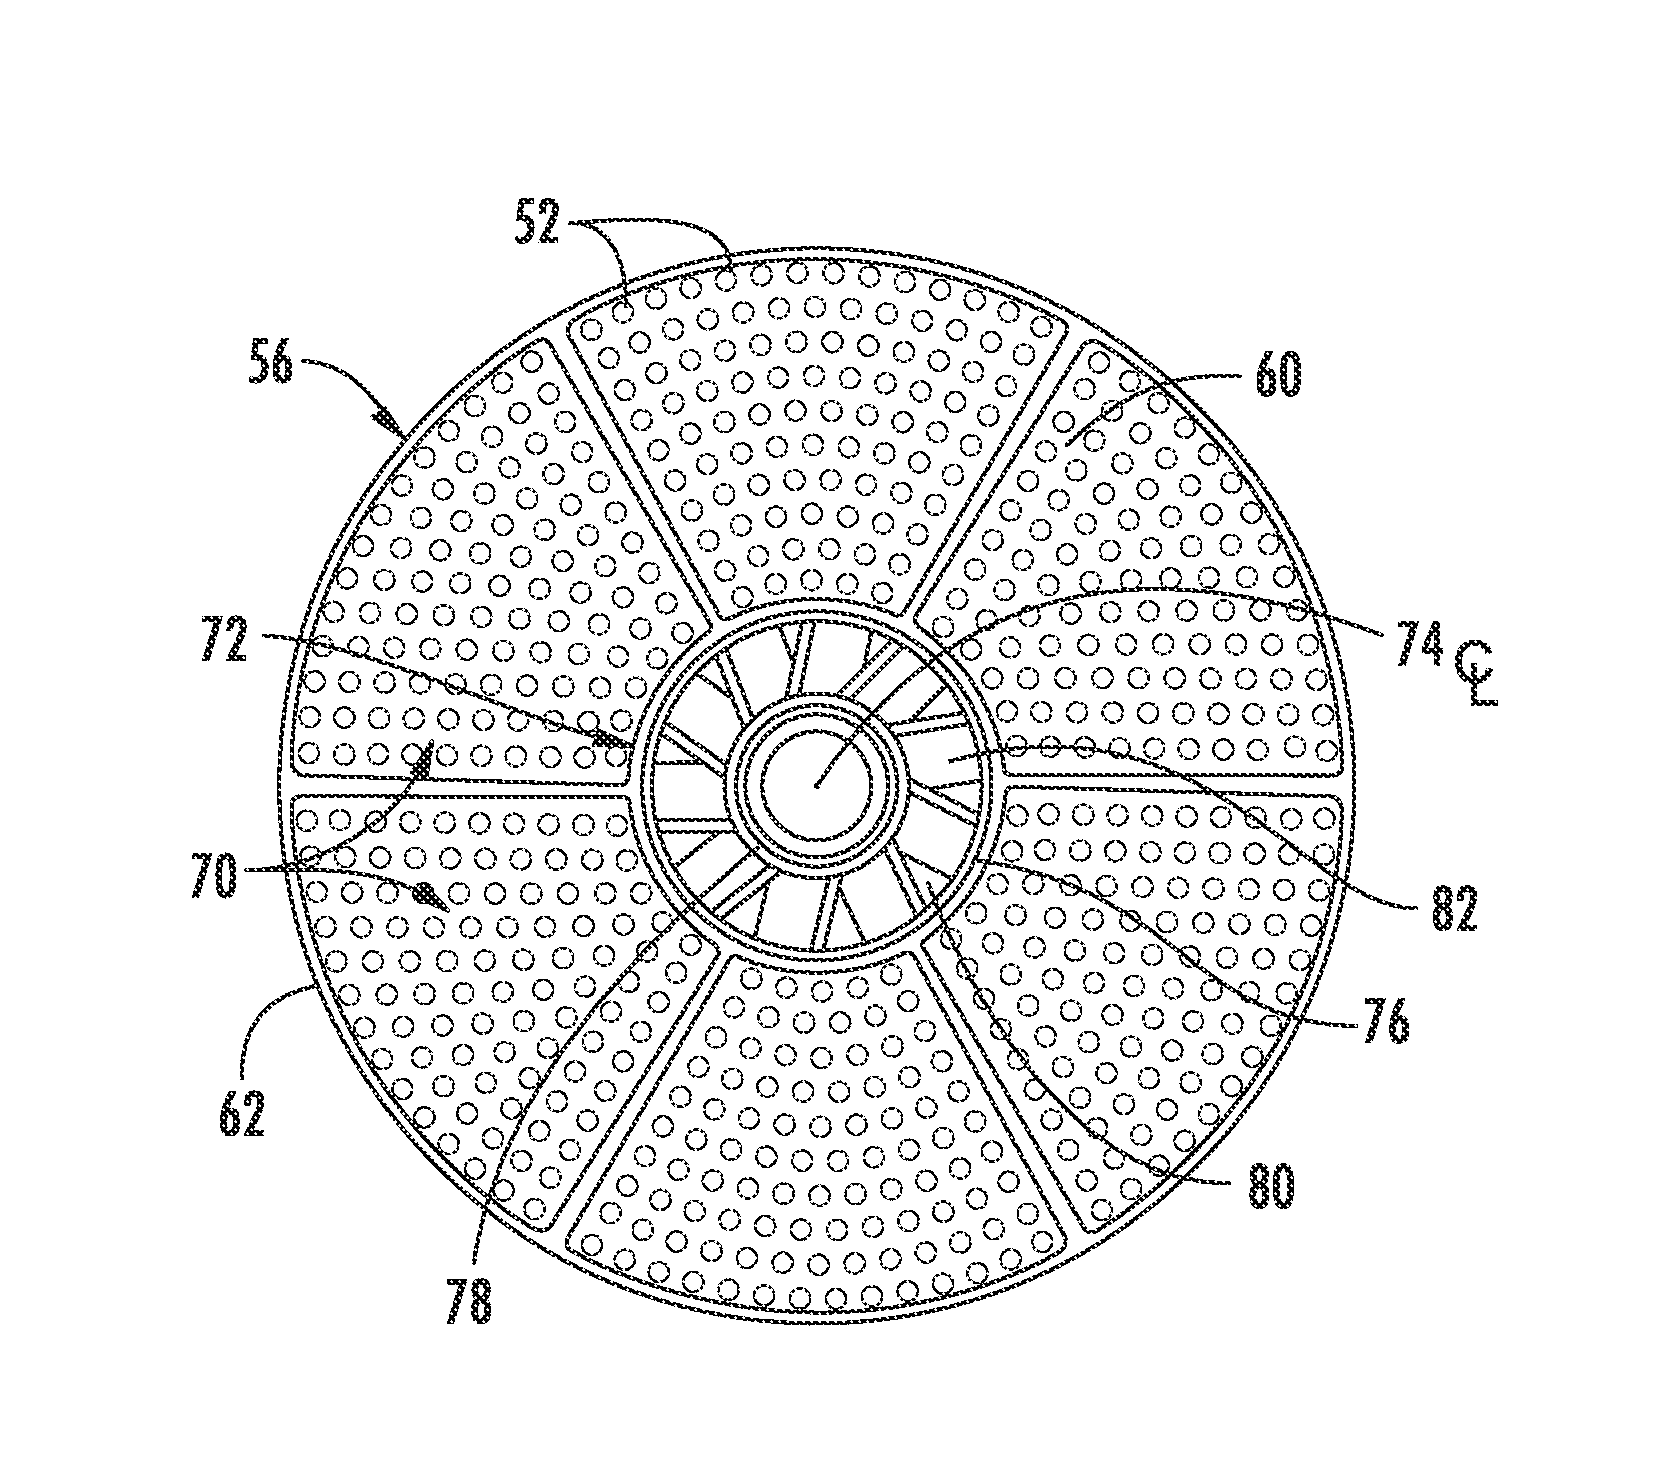 SYSTEM FOR REDUCING COMBUSTION DYNAMICS AND NOx IN A COMBUSTOR